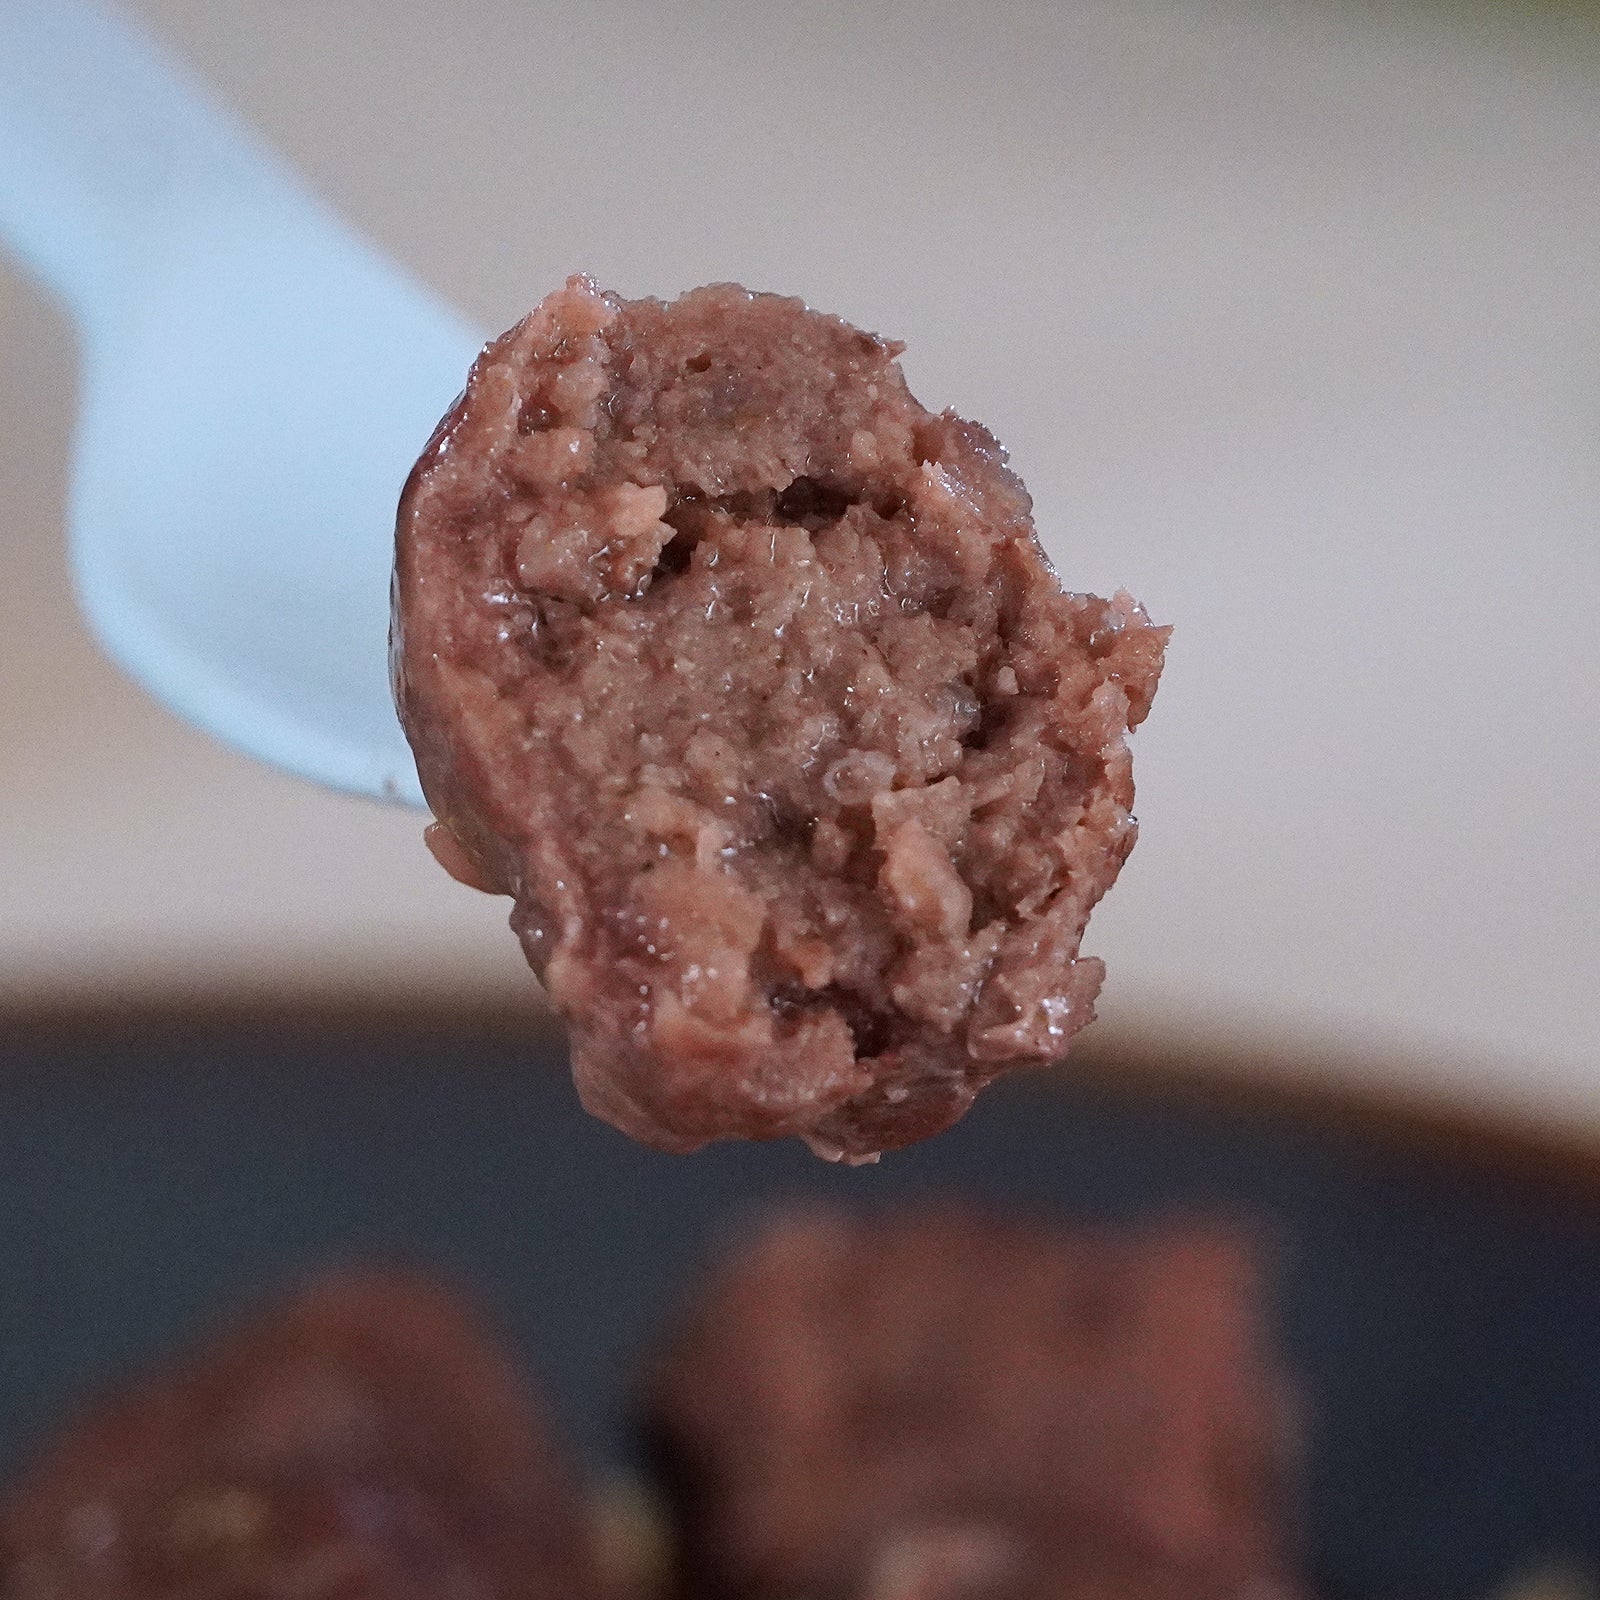 All-Natural Grass-Fed Beef Meatballs from New Zealand (300g) - Horizon Farms